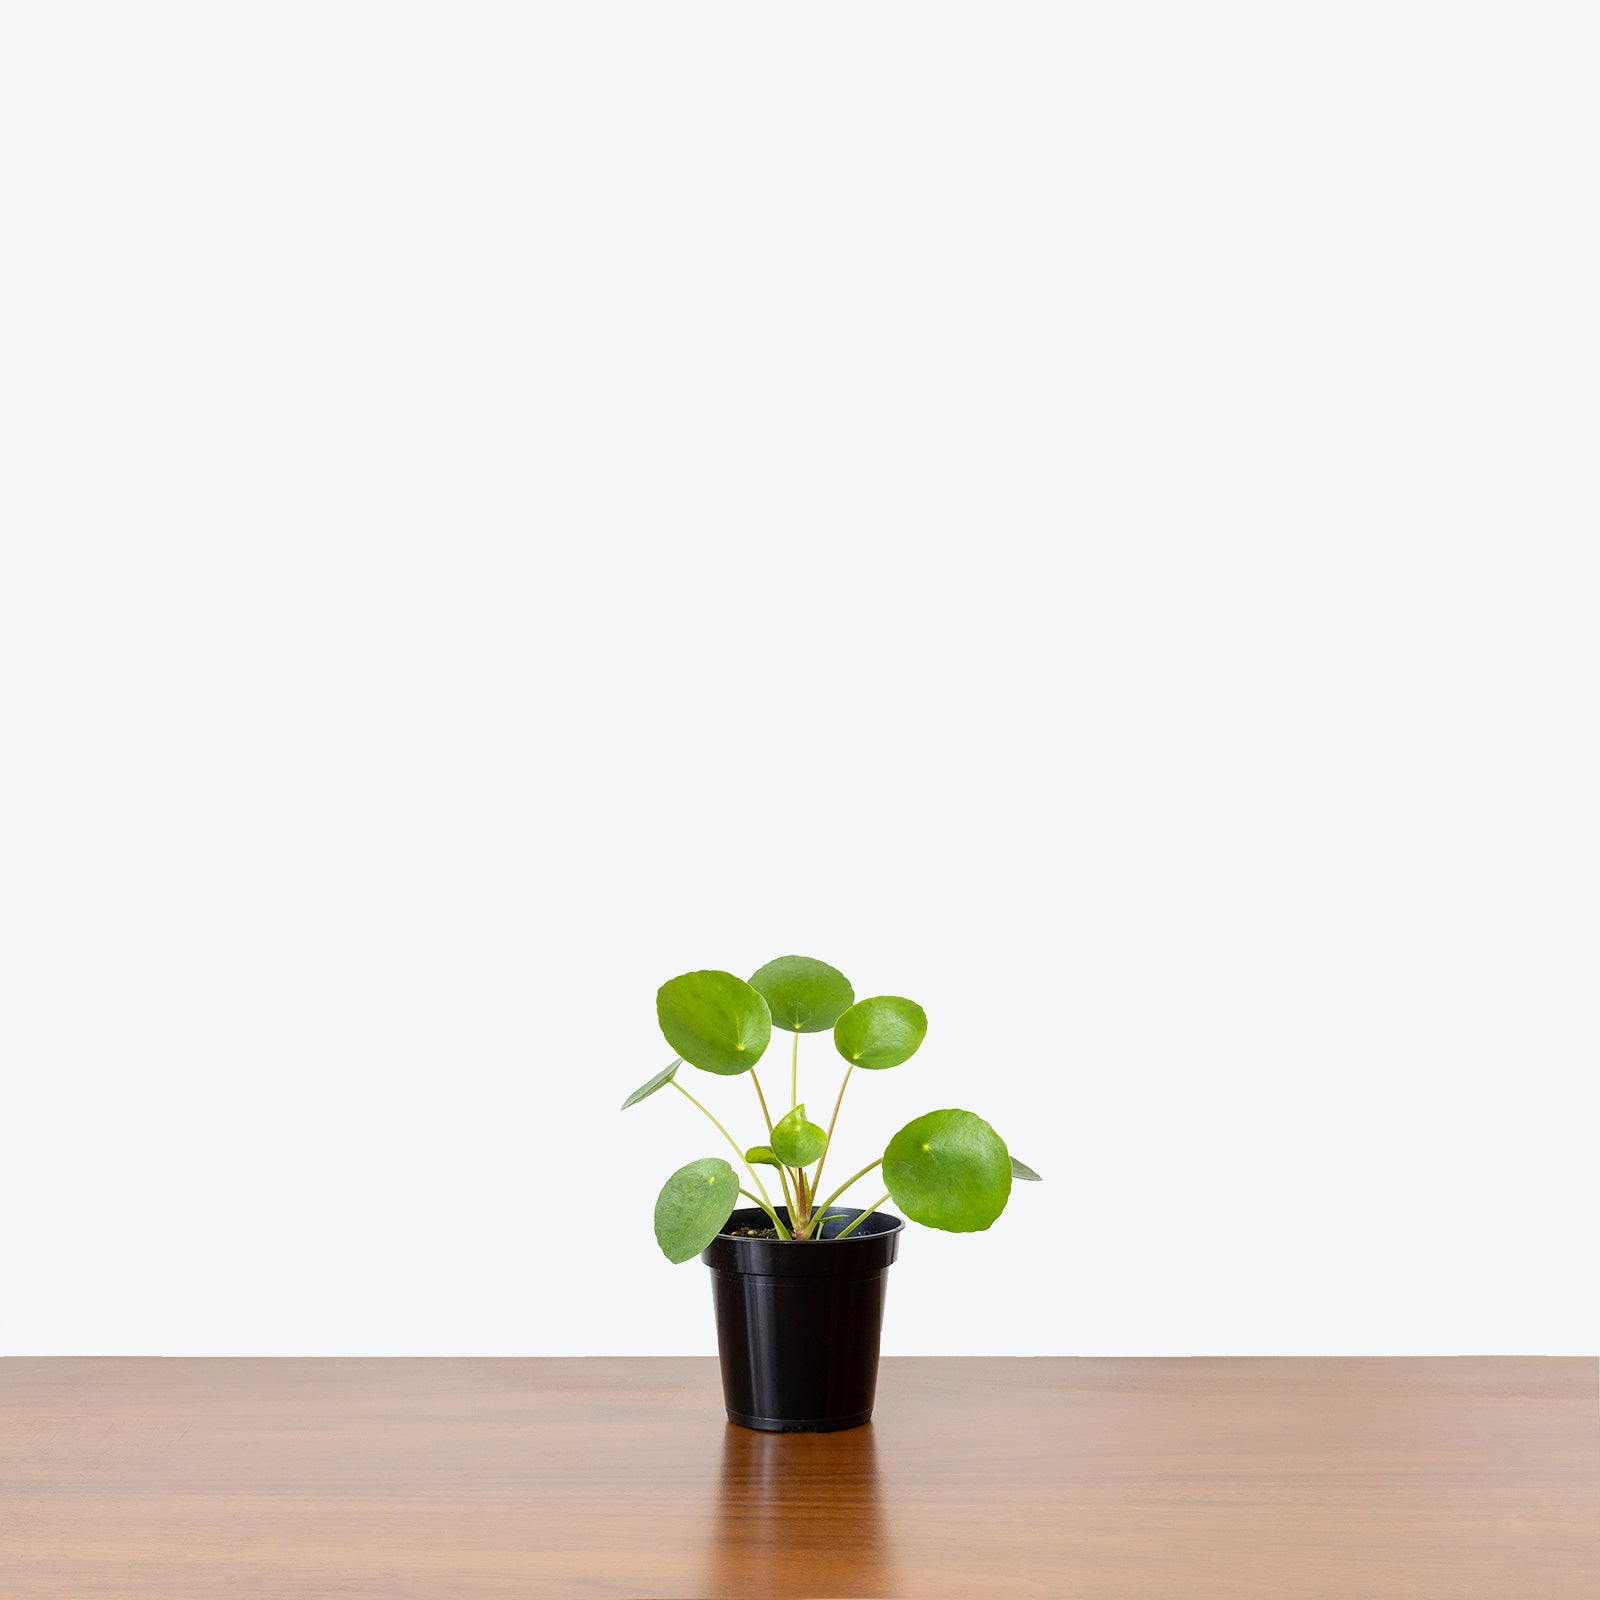 Pet Friendly Duo Pilea Peperomioides in 3D Printed Eco Friendly Planter - House Plants Delivery Toronto - JOMO Studio